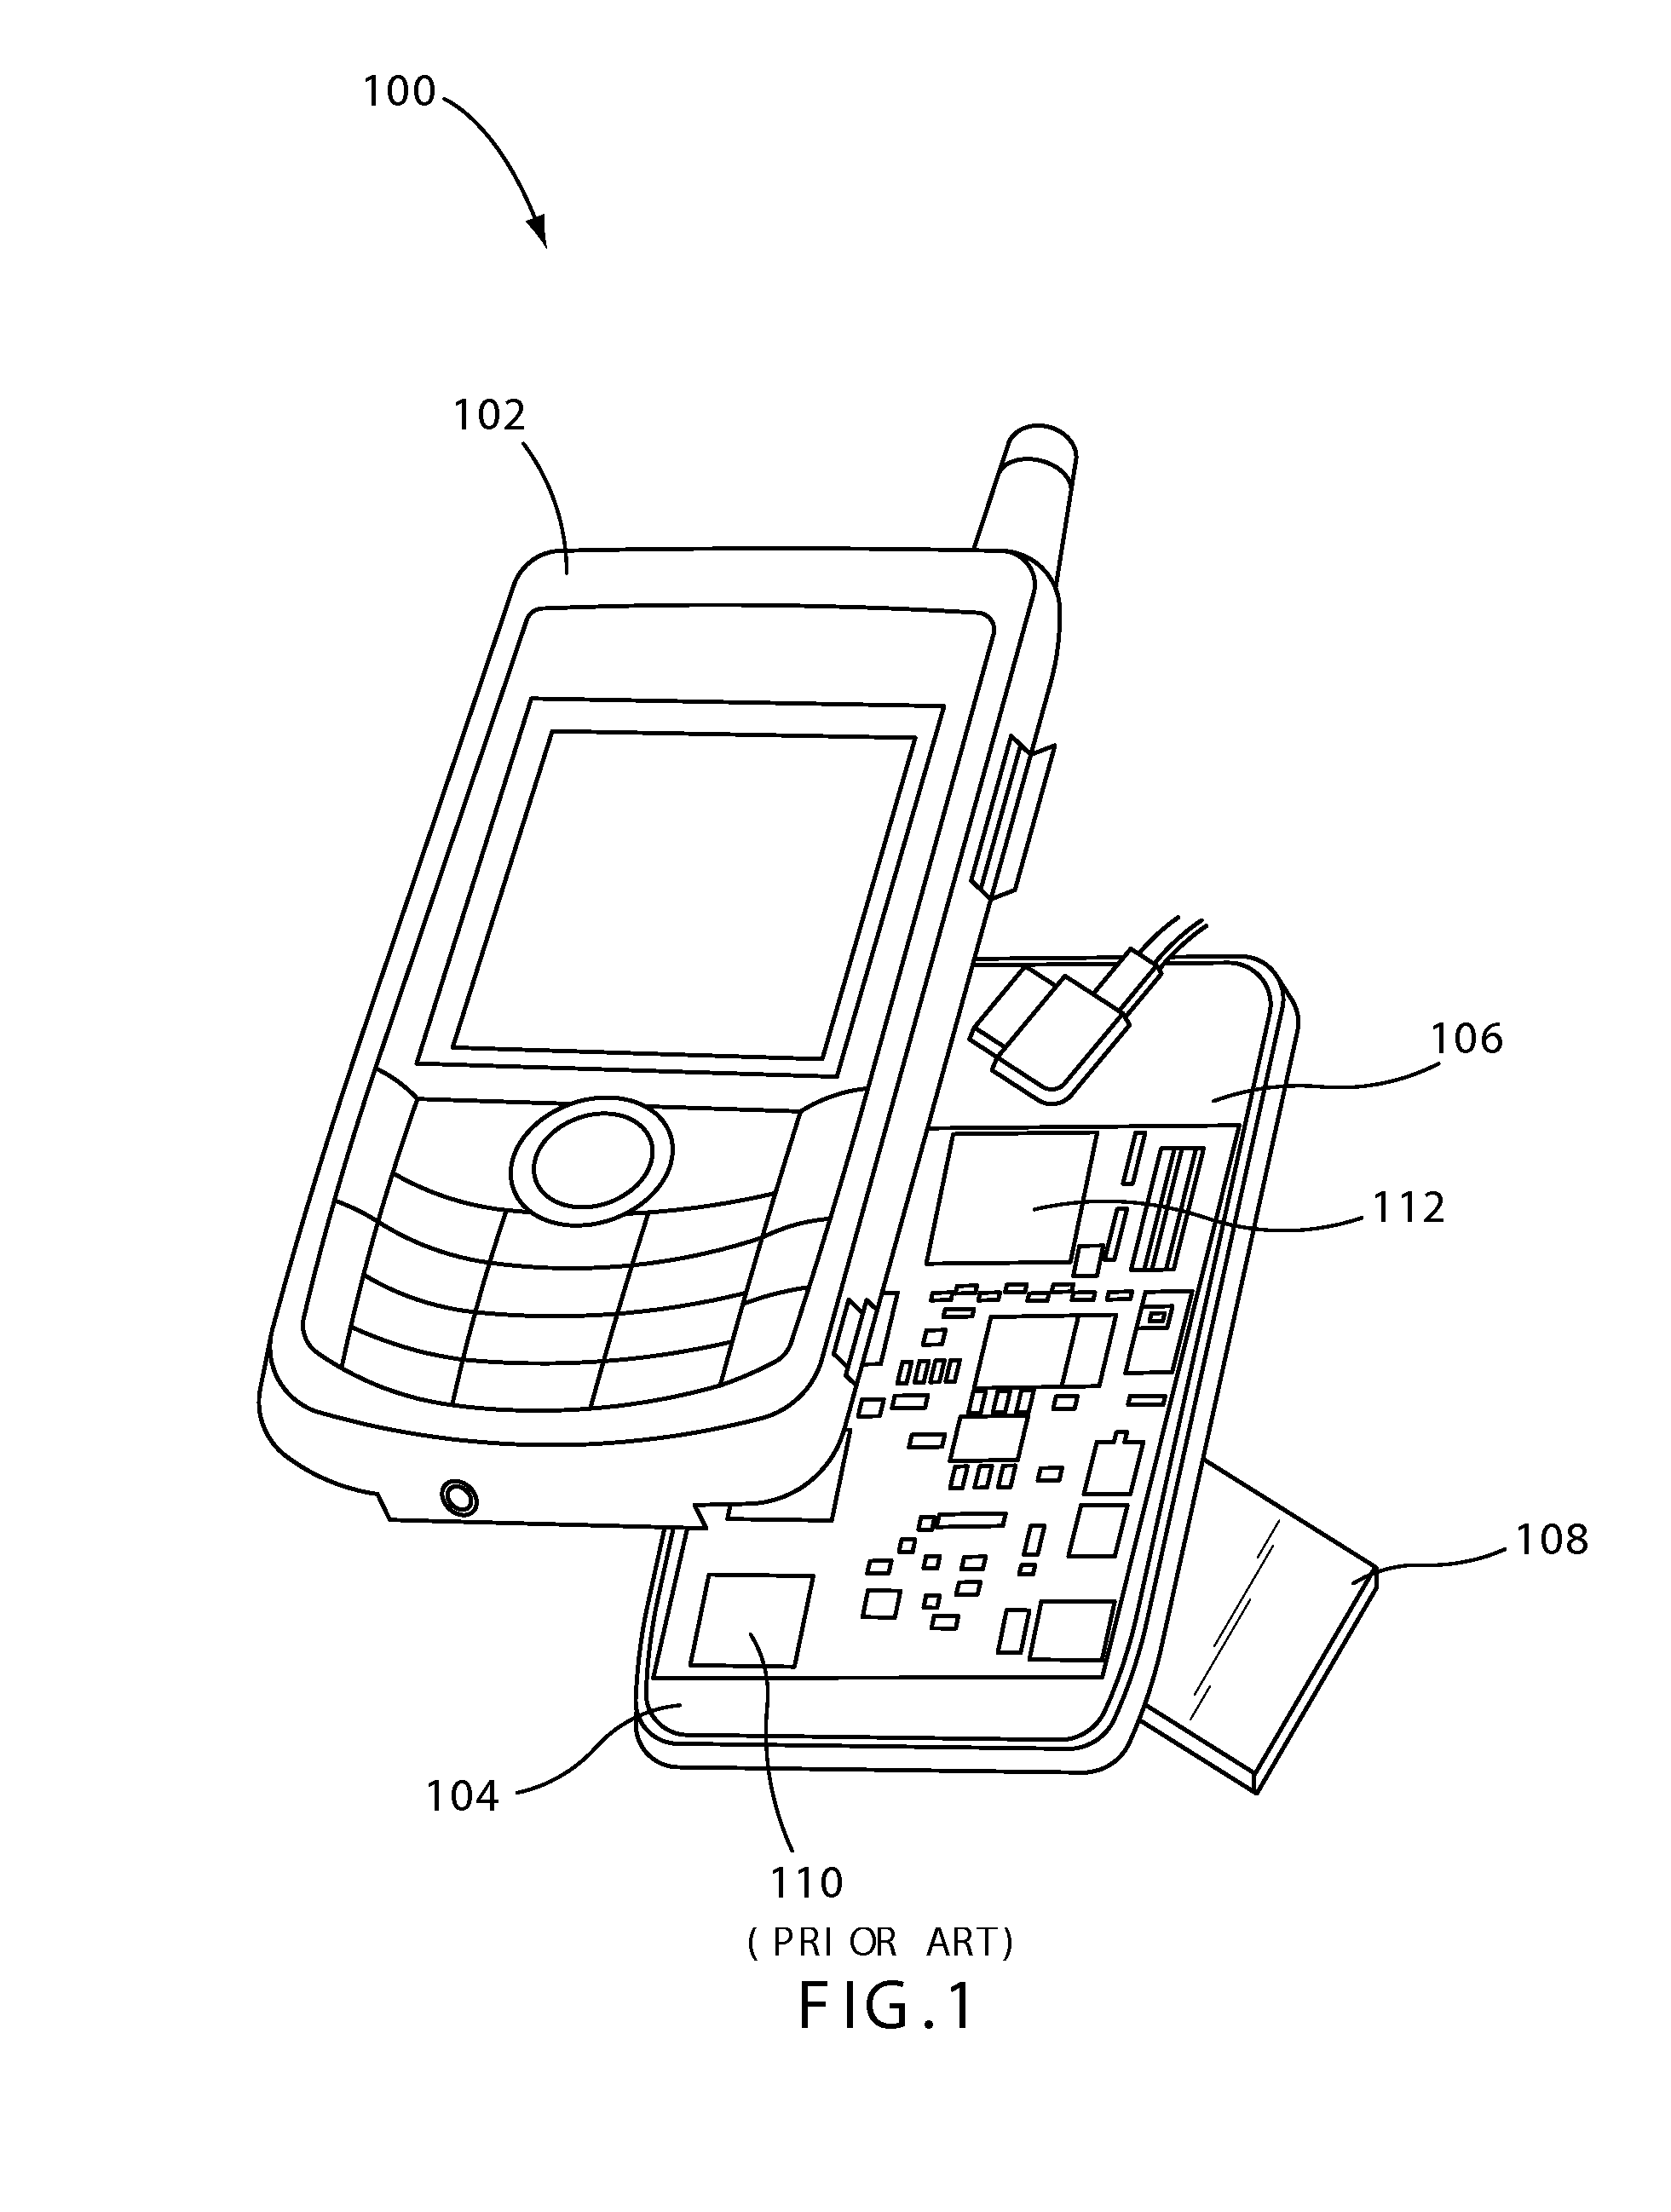 Systems, structures and materials for electronic device cooling